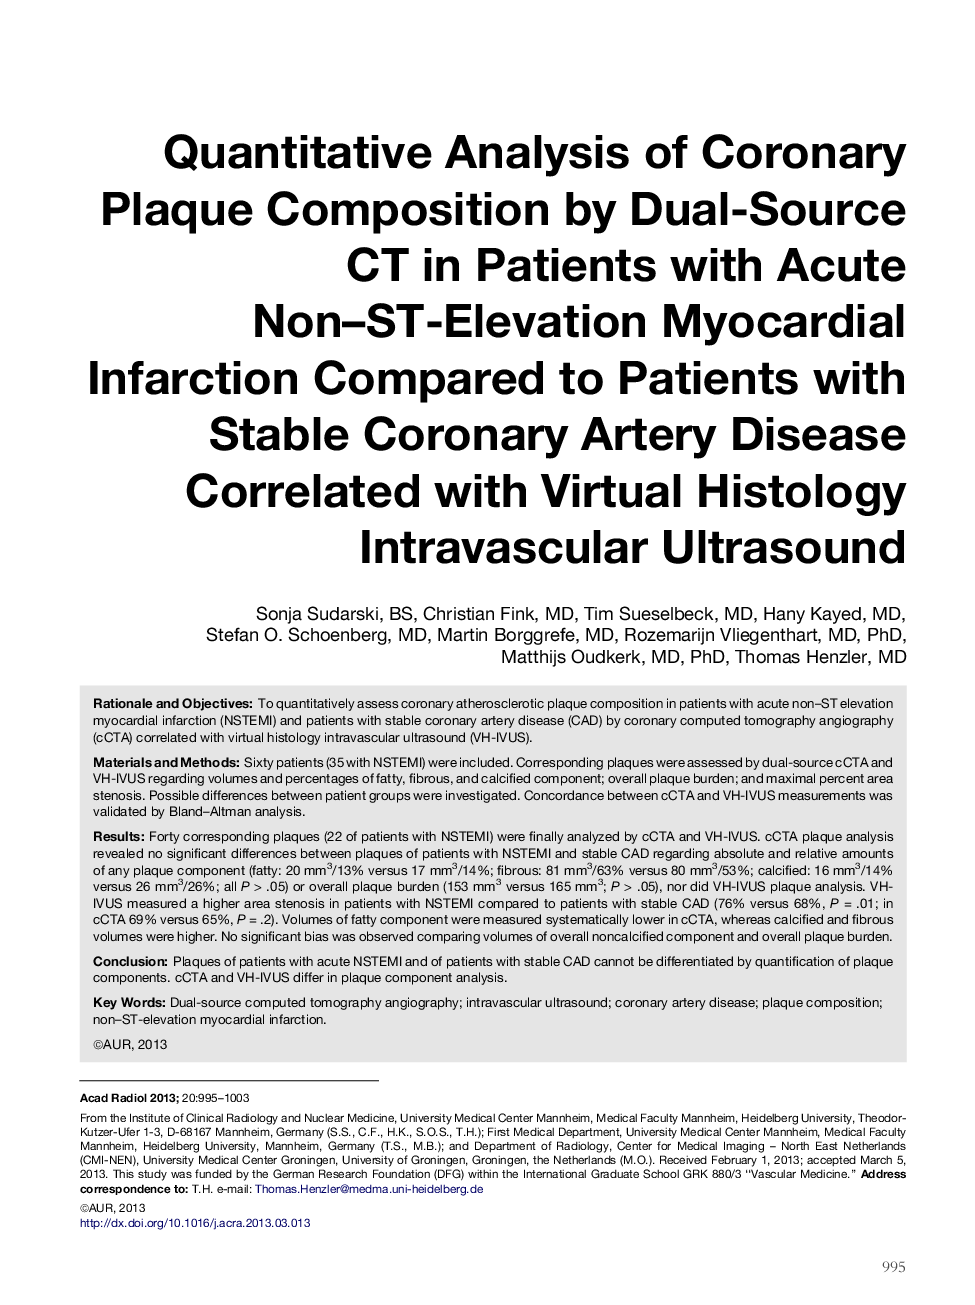 Quantitative Analysis of Coronary Plaque Composition by Dual-Source CT in Patients with Acute Non-ST-Elevation Myocardial Infarction Compared to Patients with Stable Coronary Artery Disease Correlated with Virtual Histology Intravascular Ultrasound